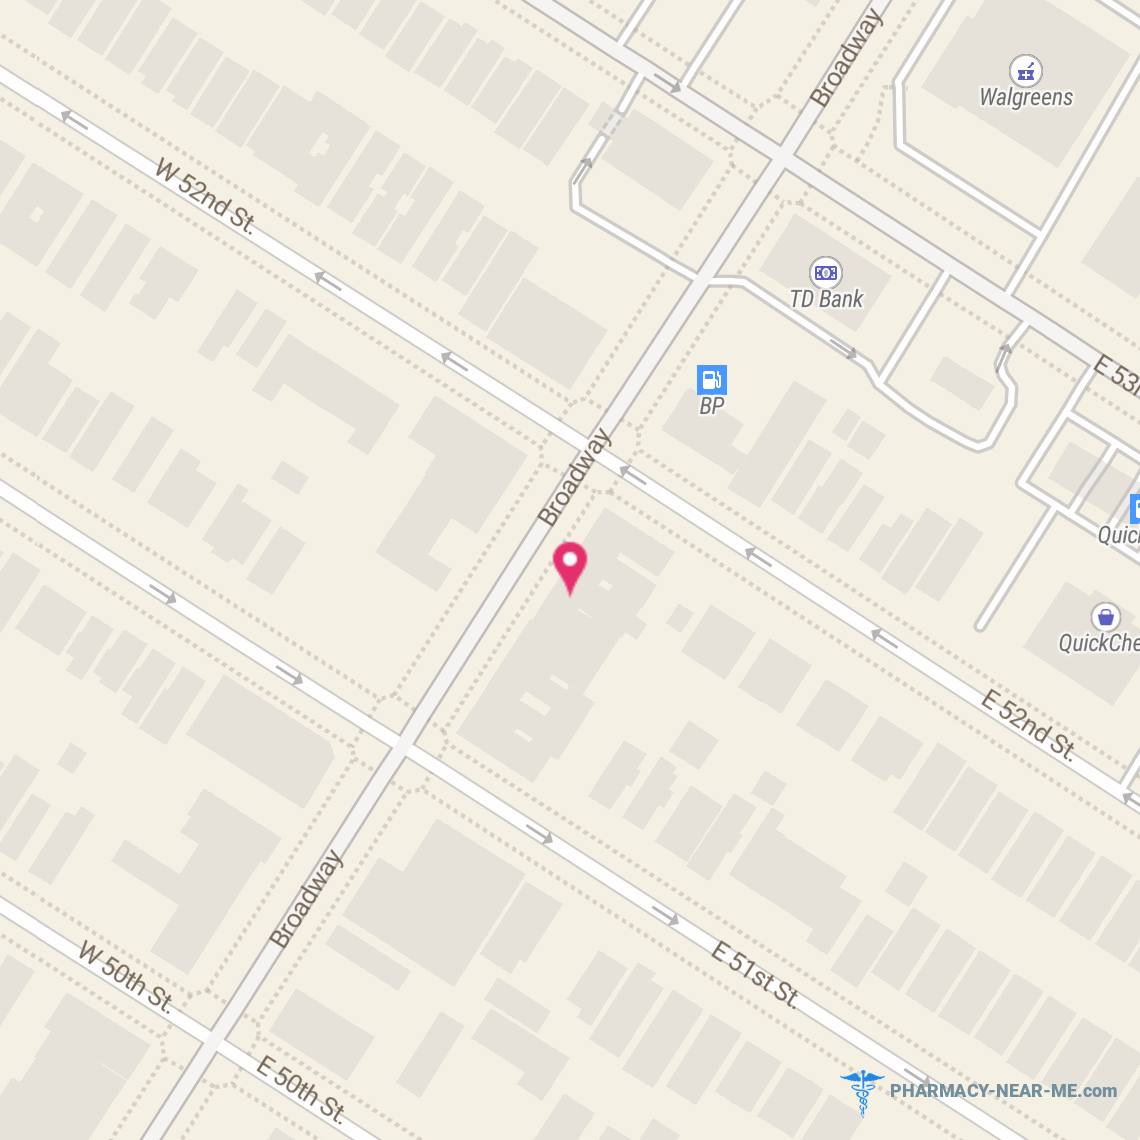 WALGREENS #15368 - Pharmacy Hours, Phone, Reviews & Information: 1080 Broadway, Bayonne, New Jersey 07002, United States